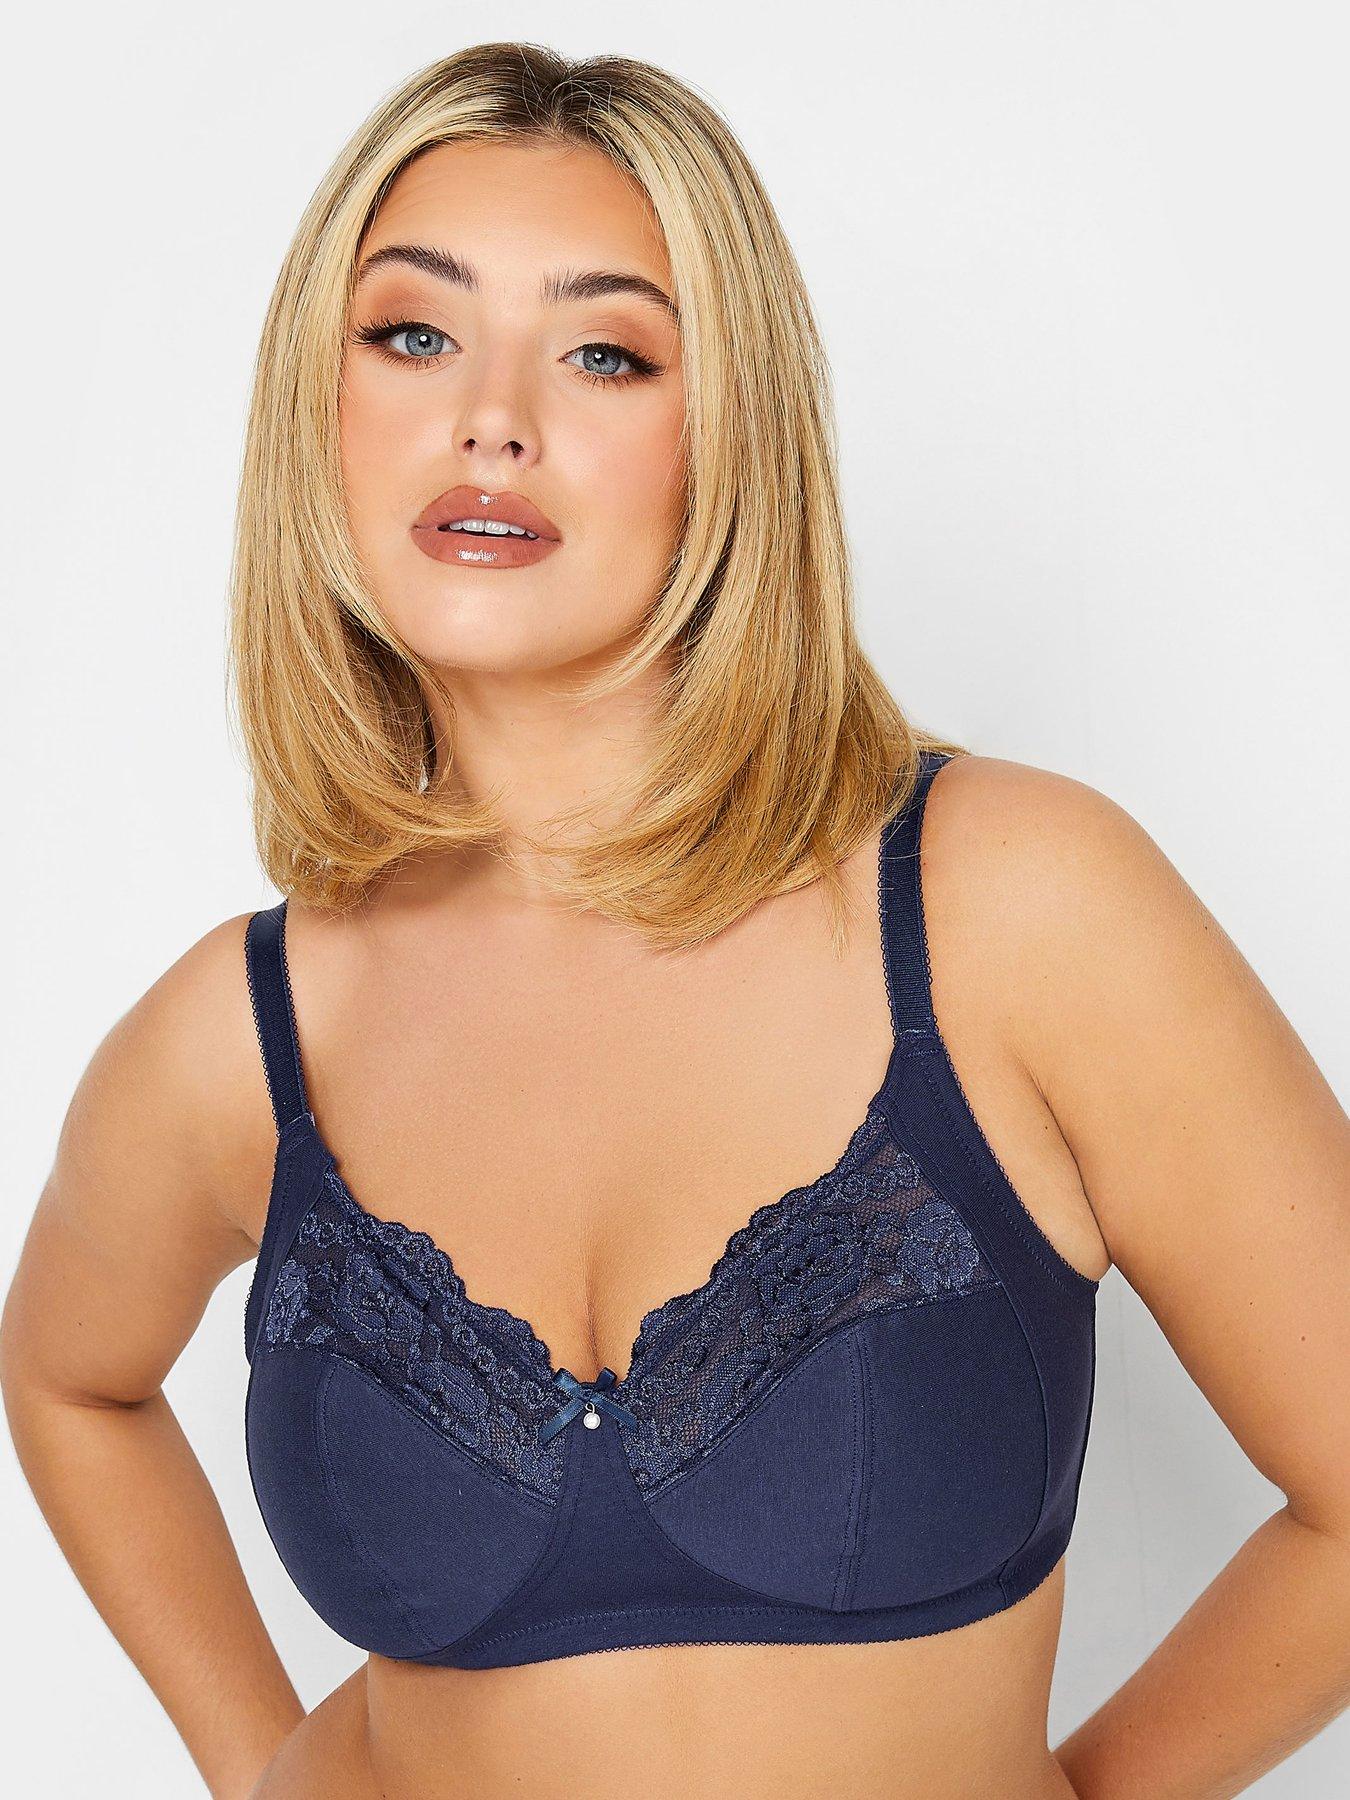 Pack of 2 Olivia Non-Wired Bras by Cotton Traders